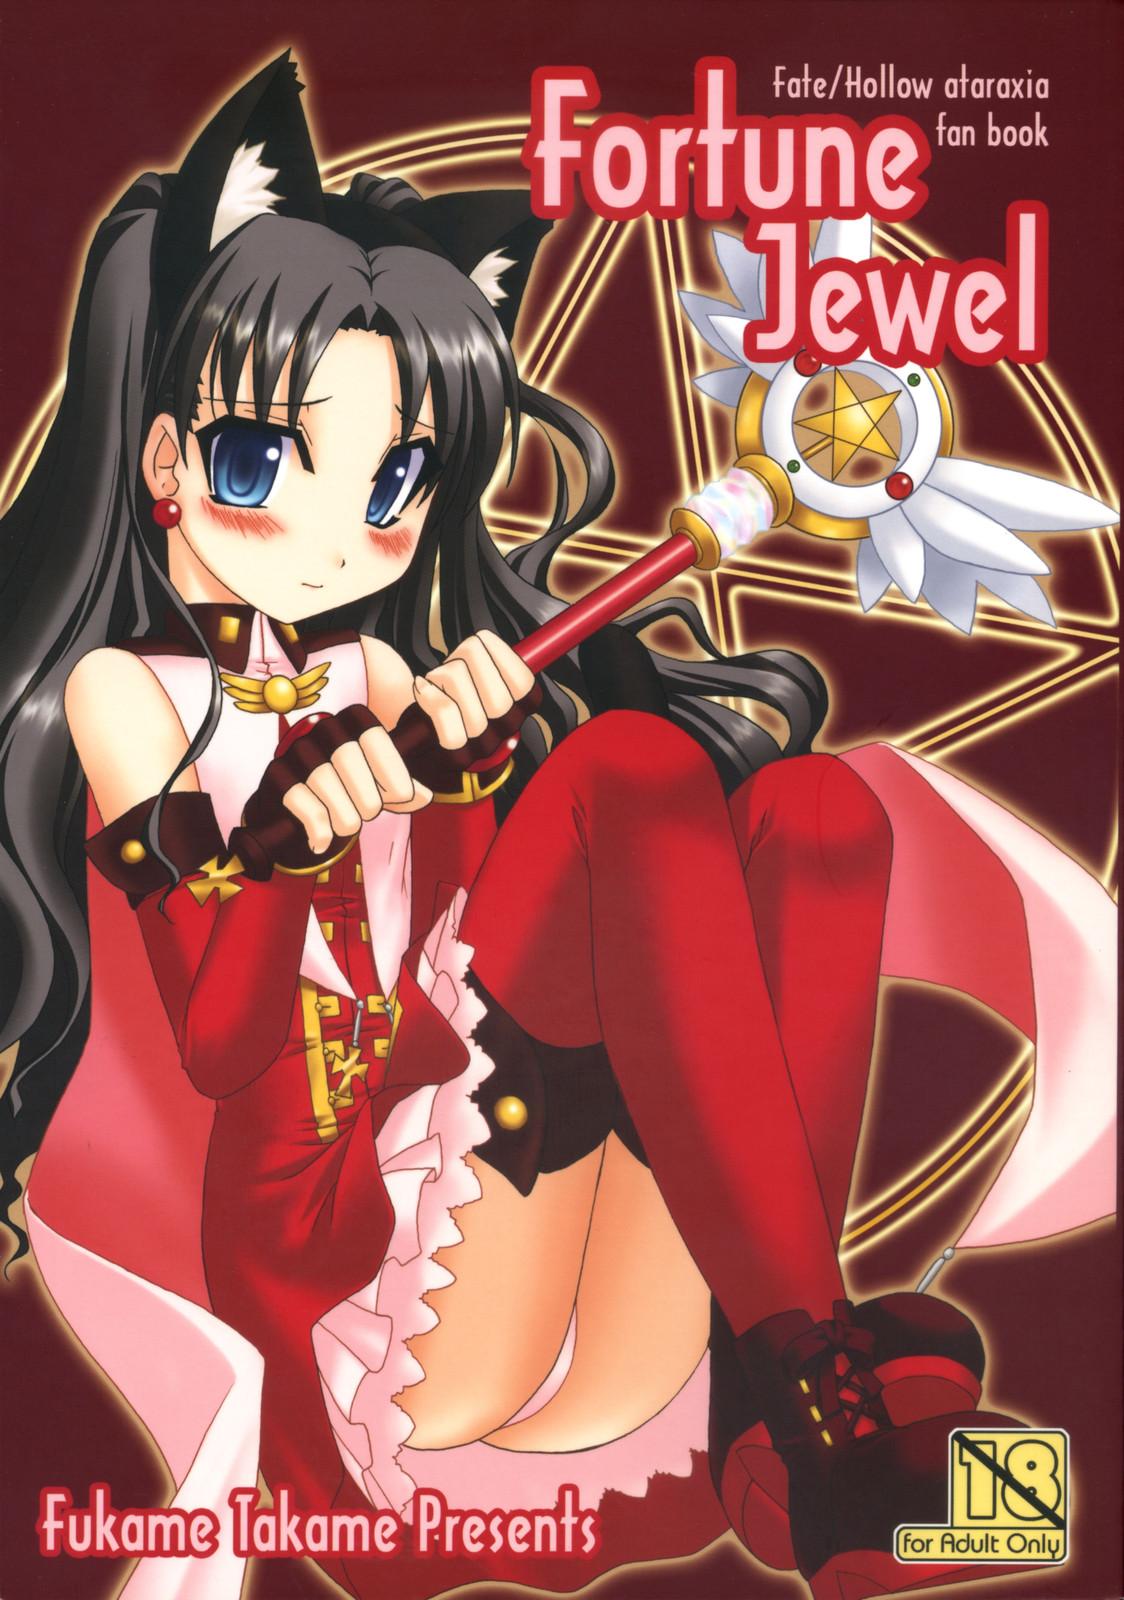 First Time Fortune Jewel - Fate stay night Fate hollow ataraxia Peituda - Page 1